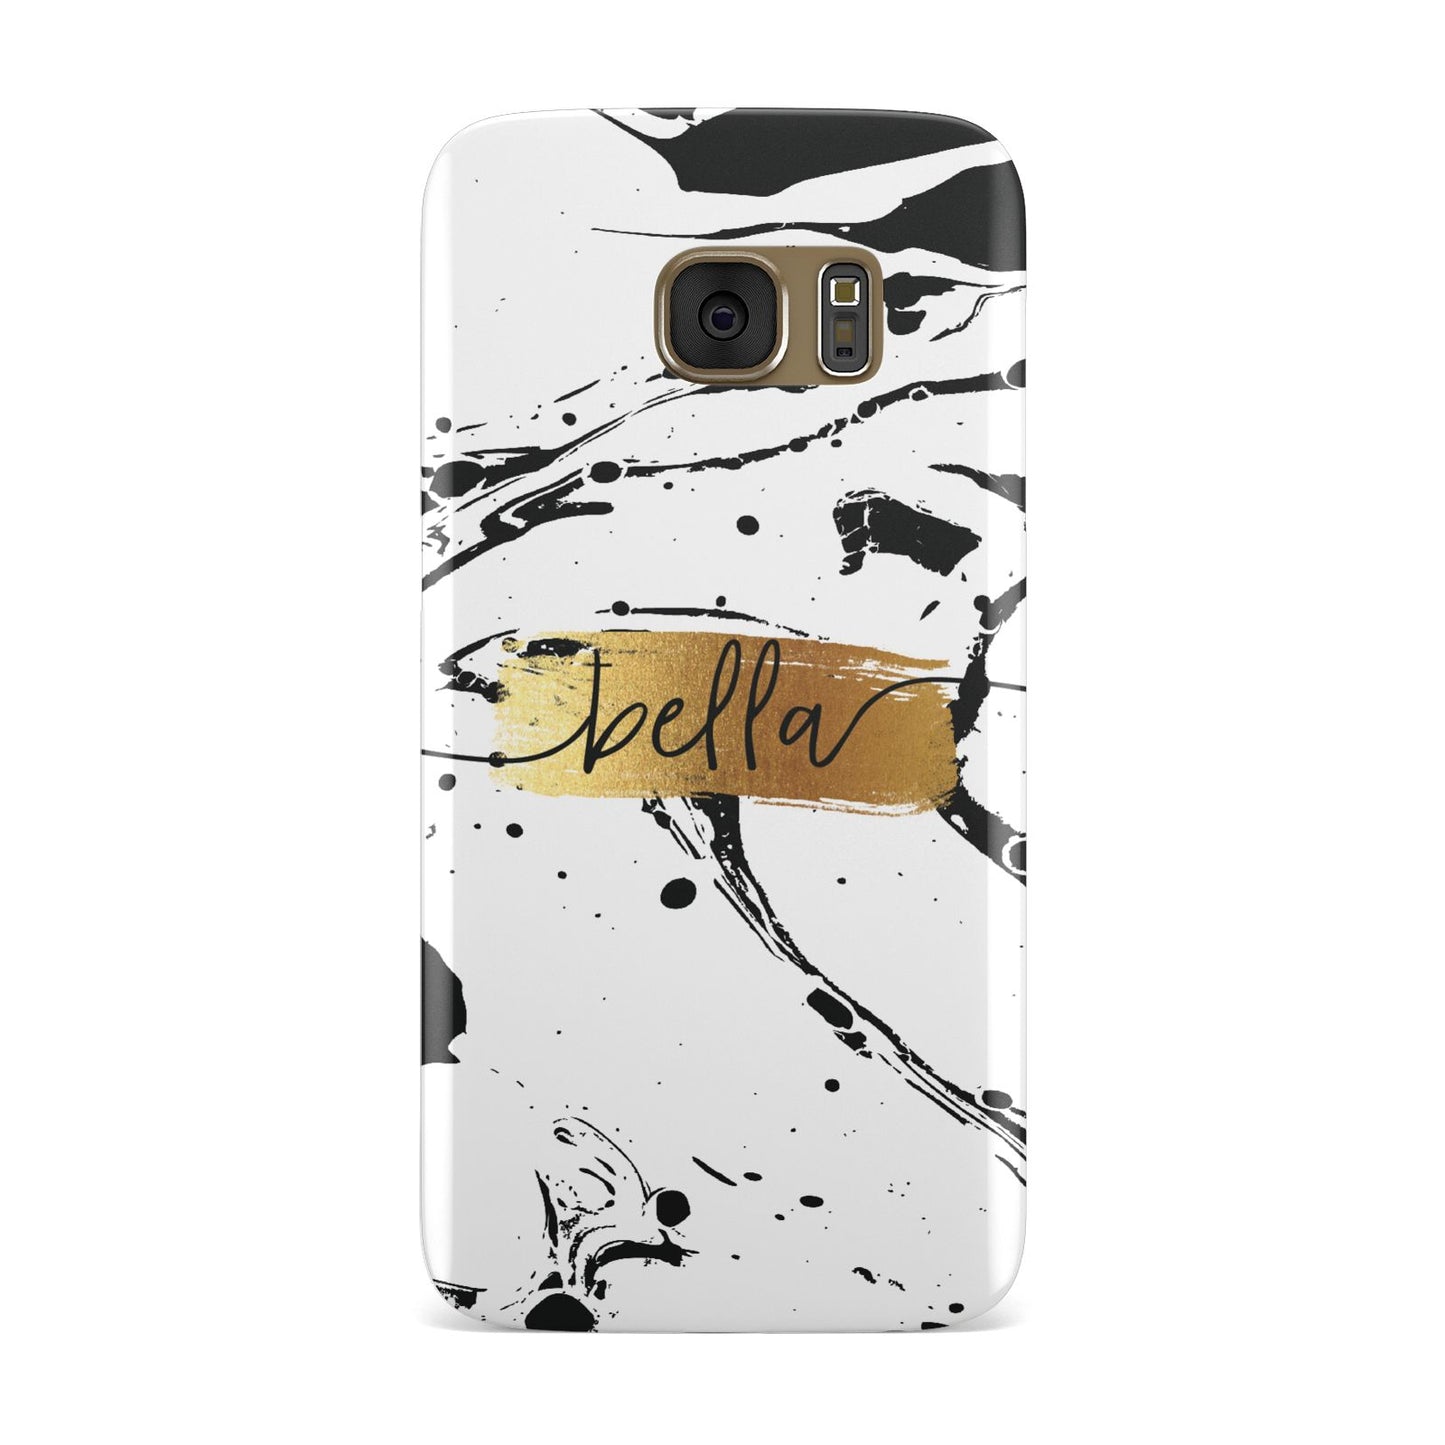 Personalised White Gold Swirl Marble Samsung Galaxy Case